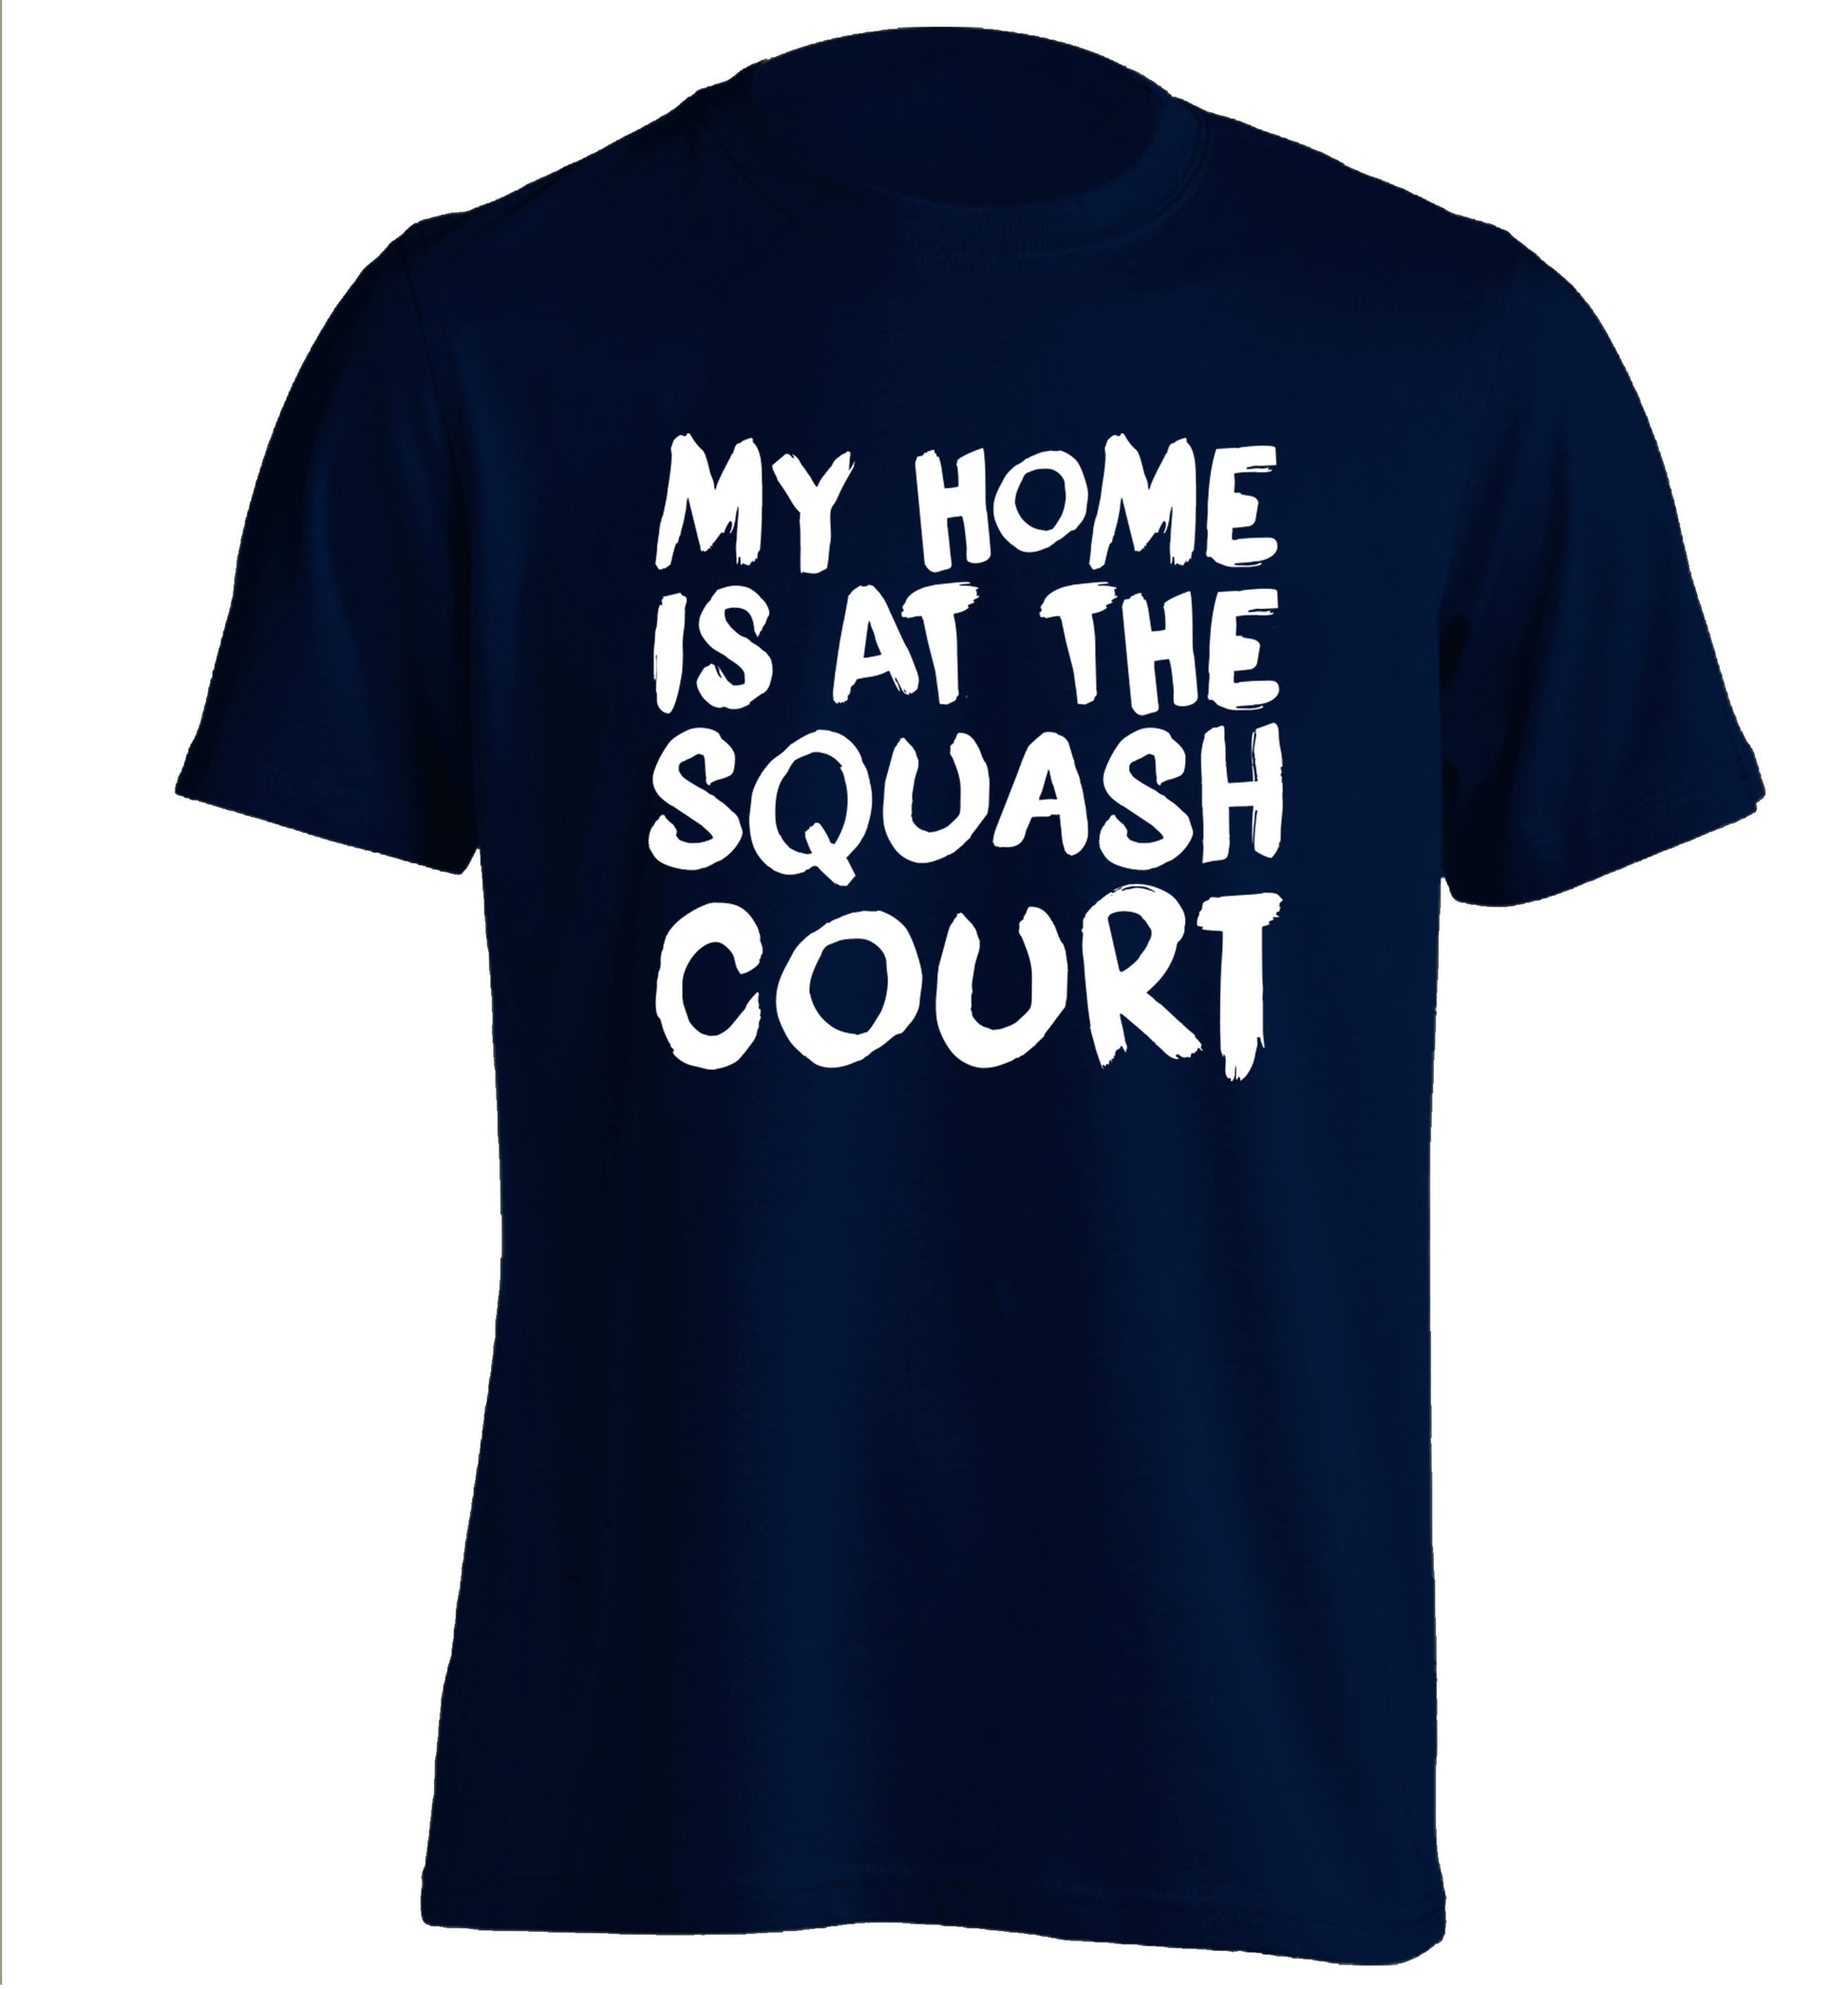 My home is at the squash court adults unisex navy Tshirt 2XL